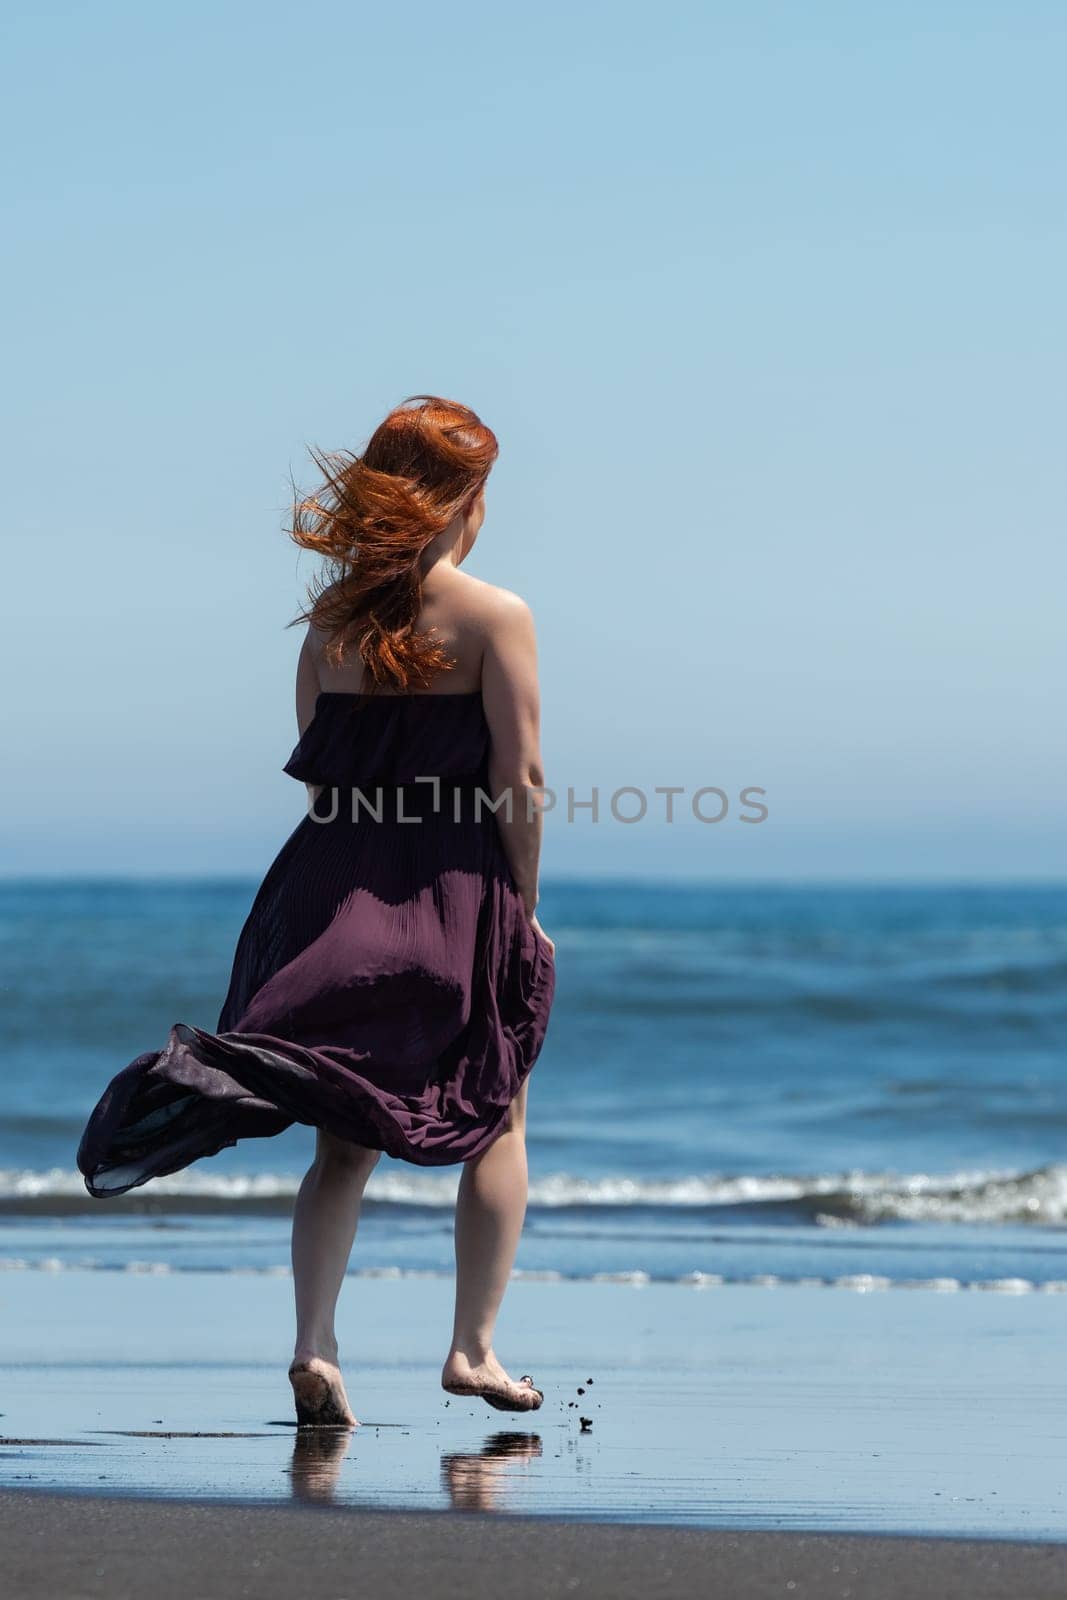 Stunning view of the woman in the long dress walking towards the crystal blue sea on the sandy beach by Alexander-Piragis